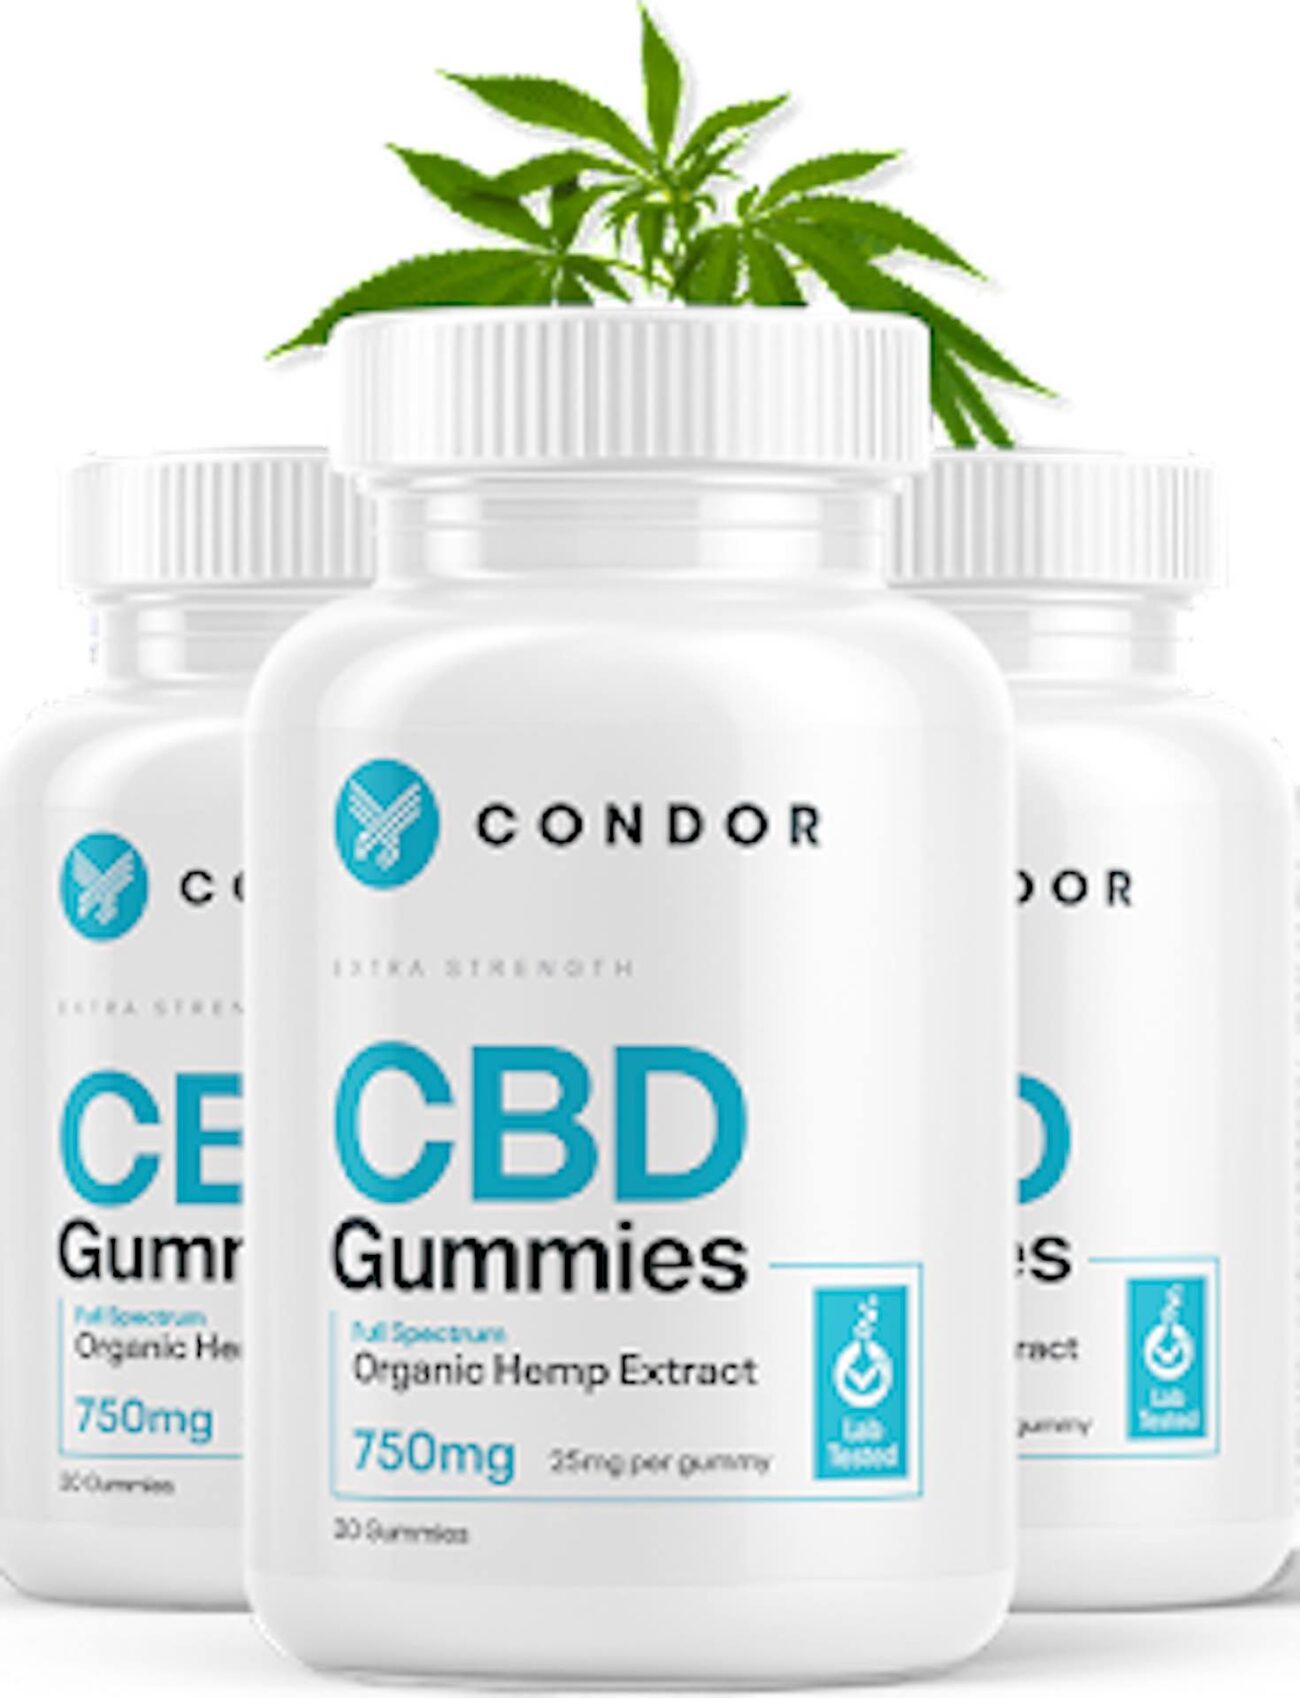 Everyone wants CBD gummies these days, and Condor has some of the best on the market. Here's our honest review of these CBD gummies.